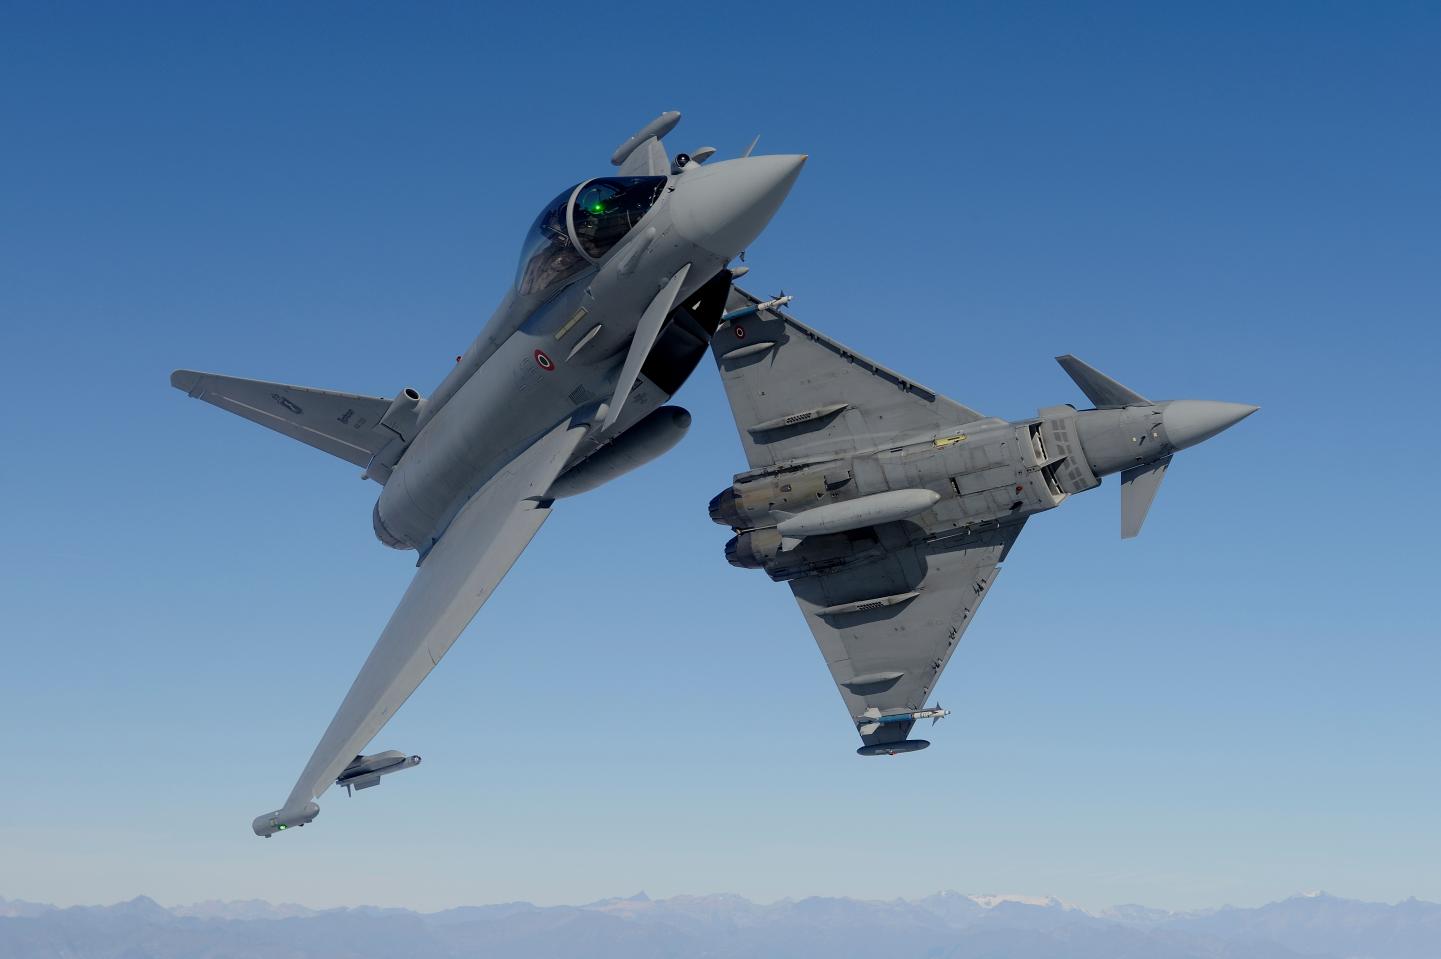 ALSO LMA ON THE EUROFIGHTER